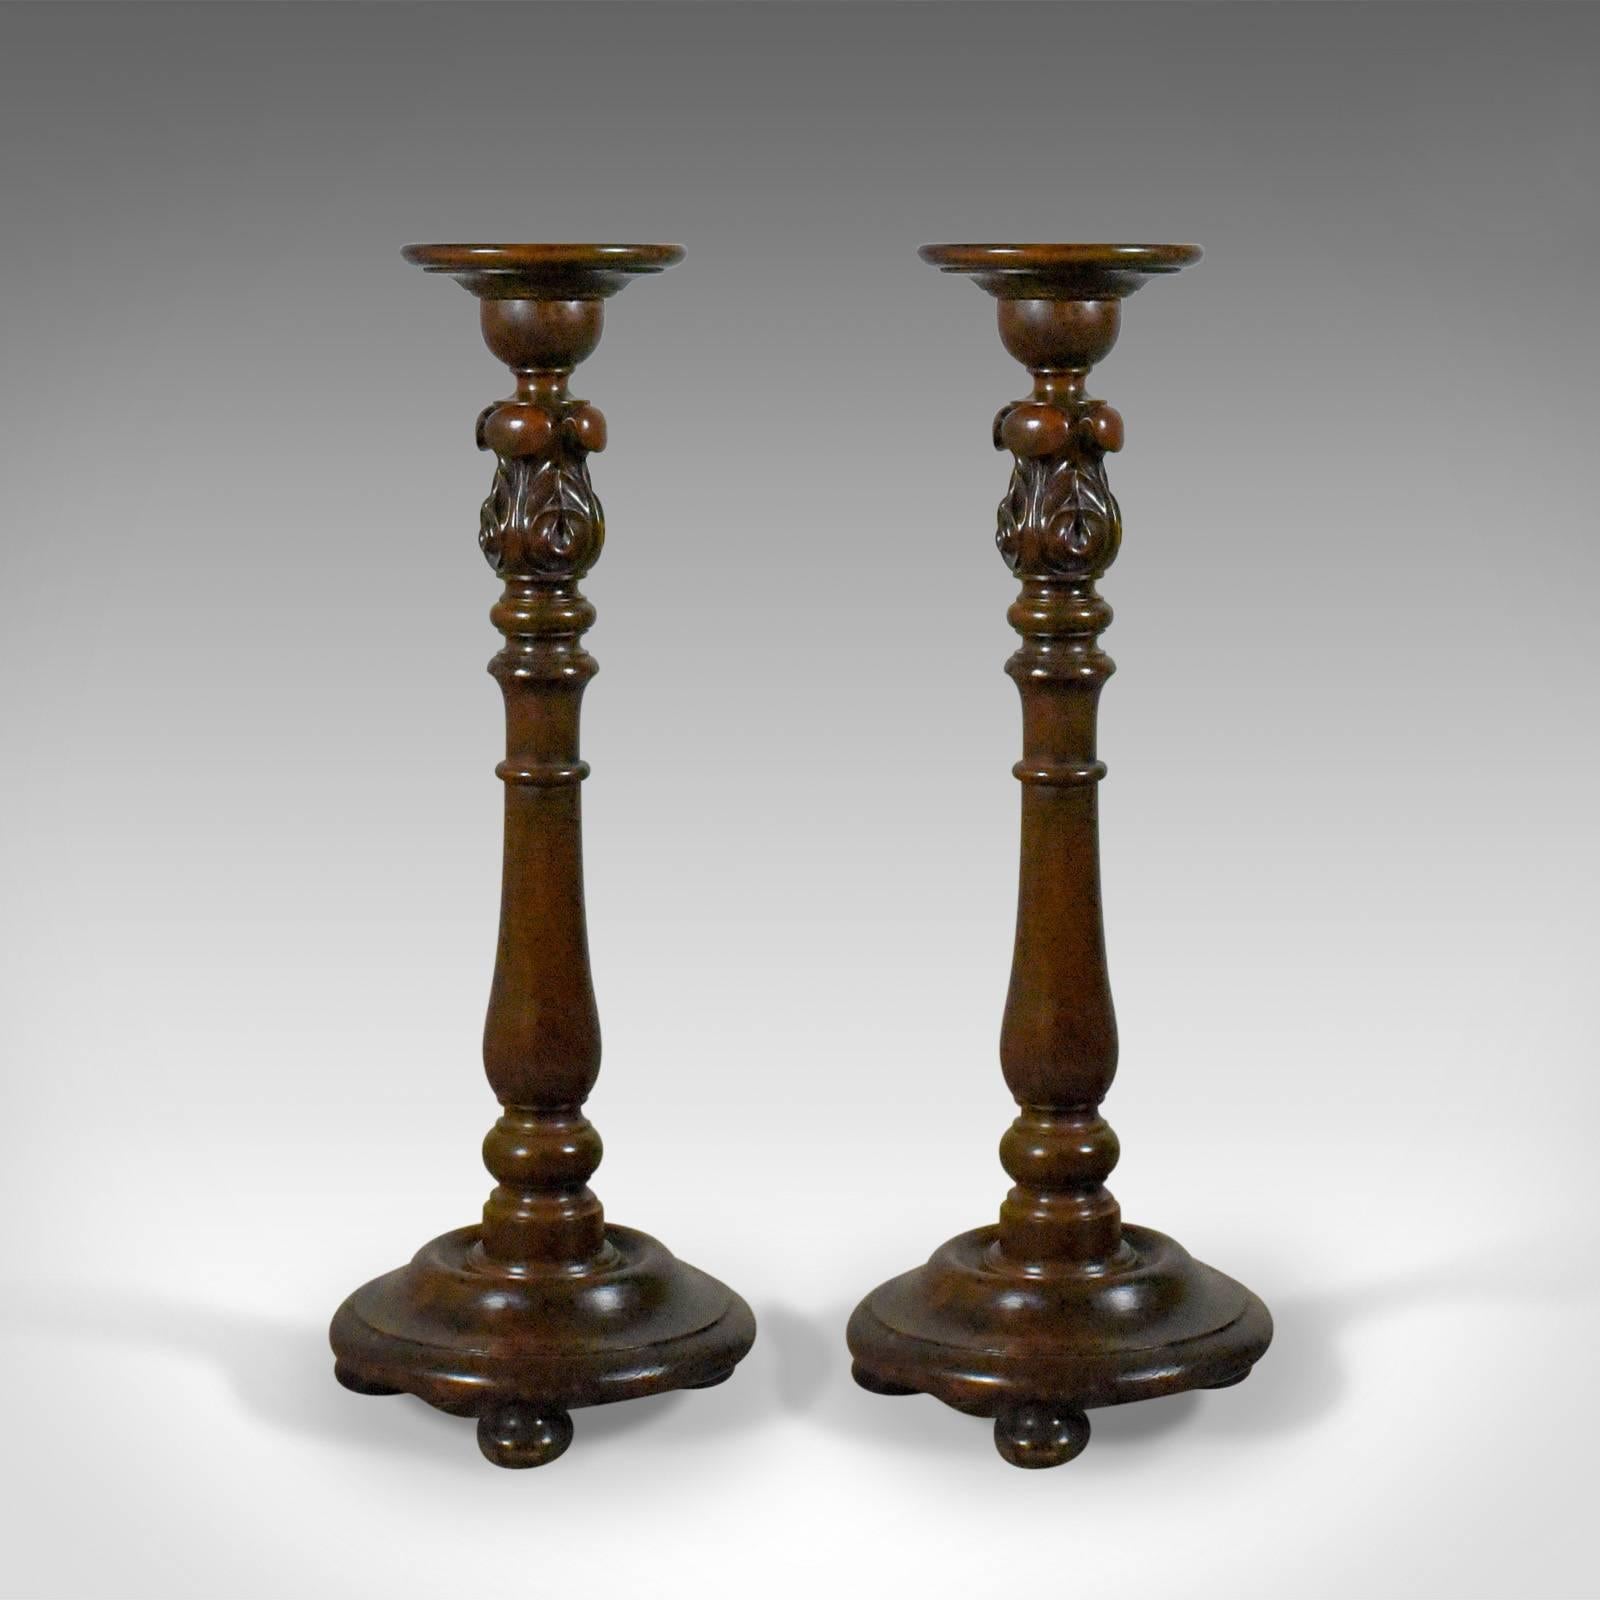 This is a pair of antique torcheres, English, Victorian plant stands in elm and mahogany dating to circa 1900.

Displaying deep russet tones to the quality mahogany stems
Anchored on turned elm plates with grain interest
Raised upon quality bun